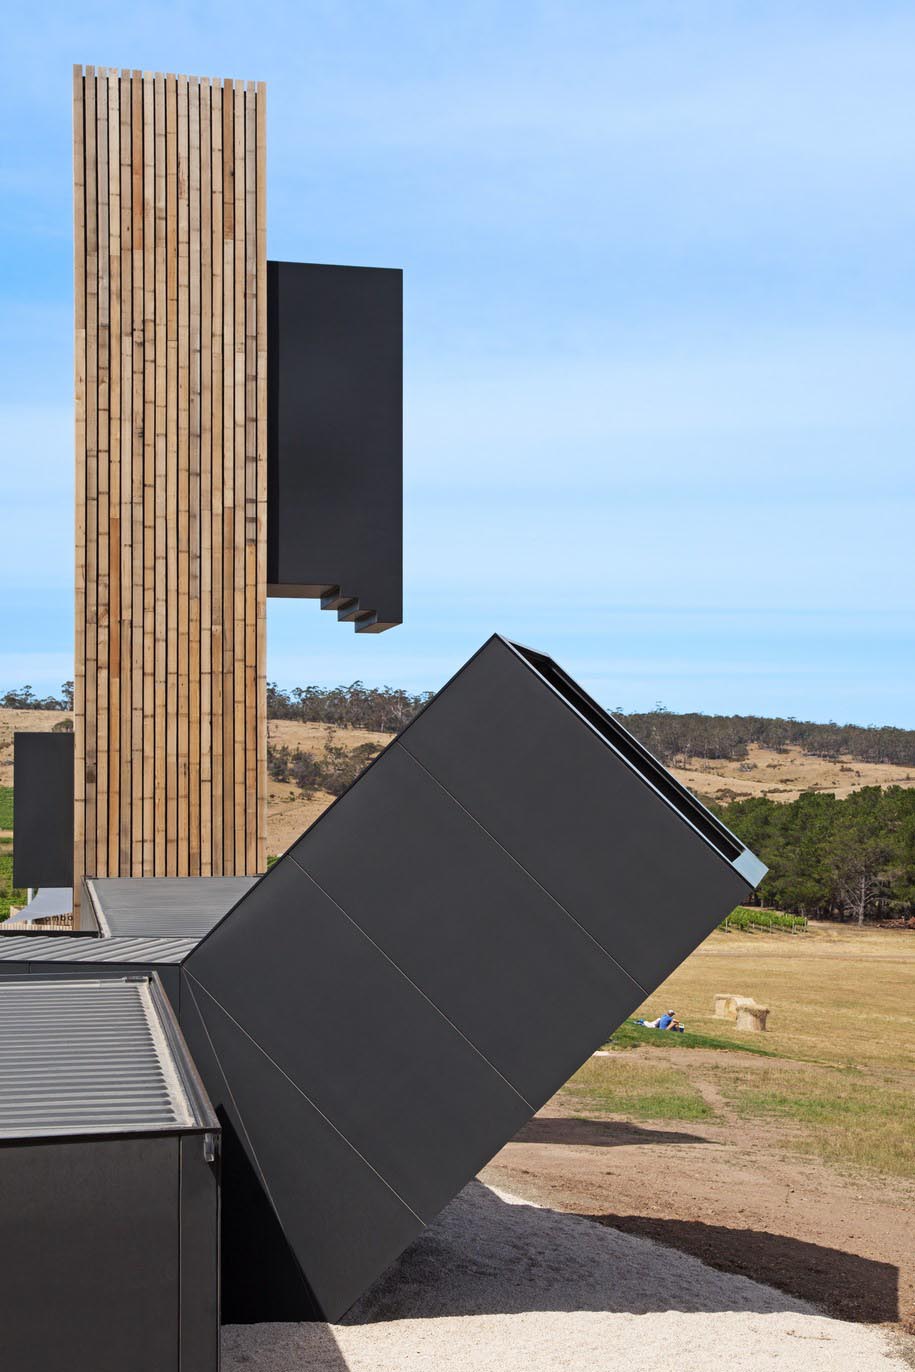 Archisearch Devil's Corner, designed by Cumulus Studio, seeks to create a new tourism experience